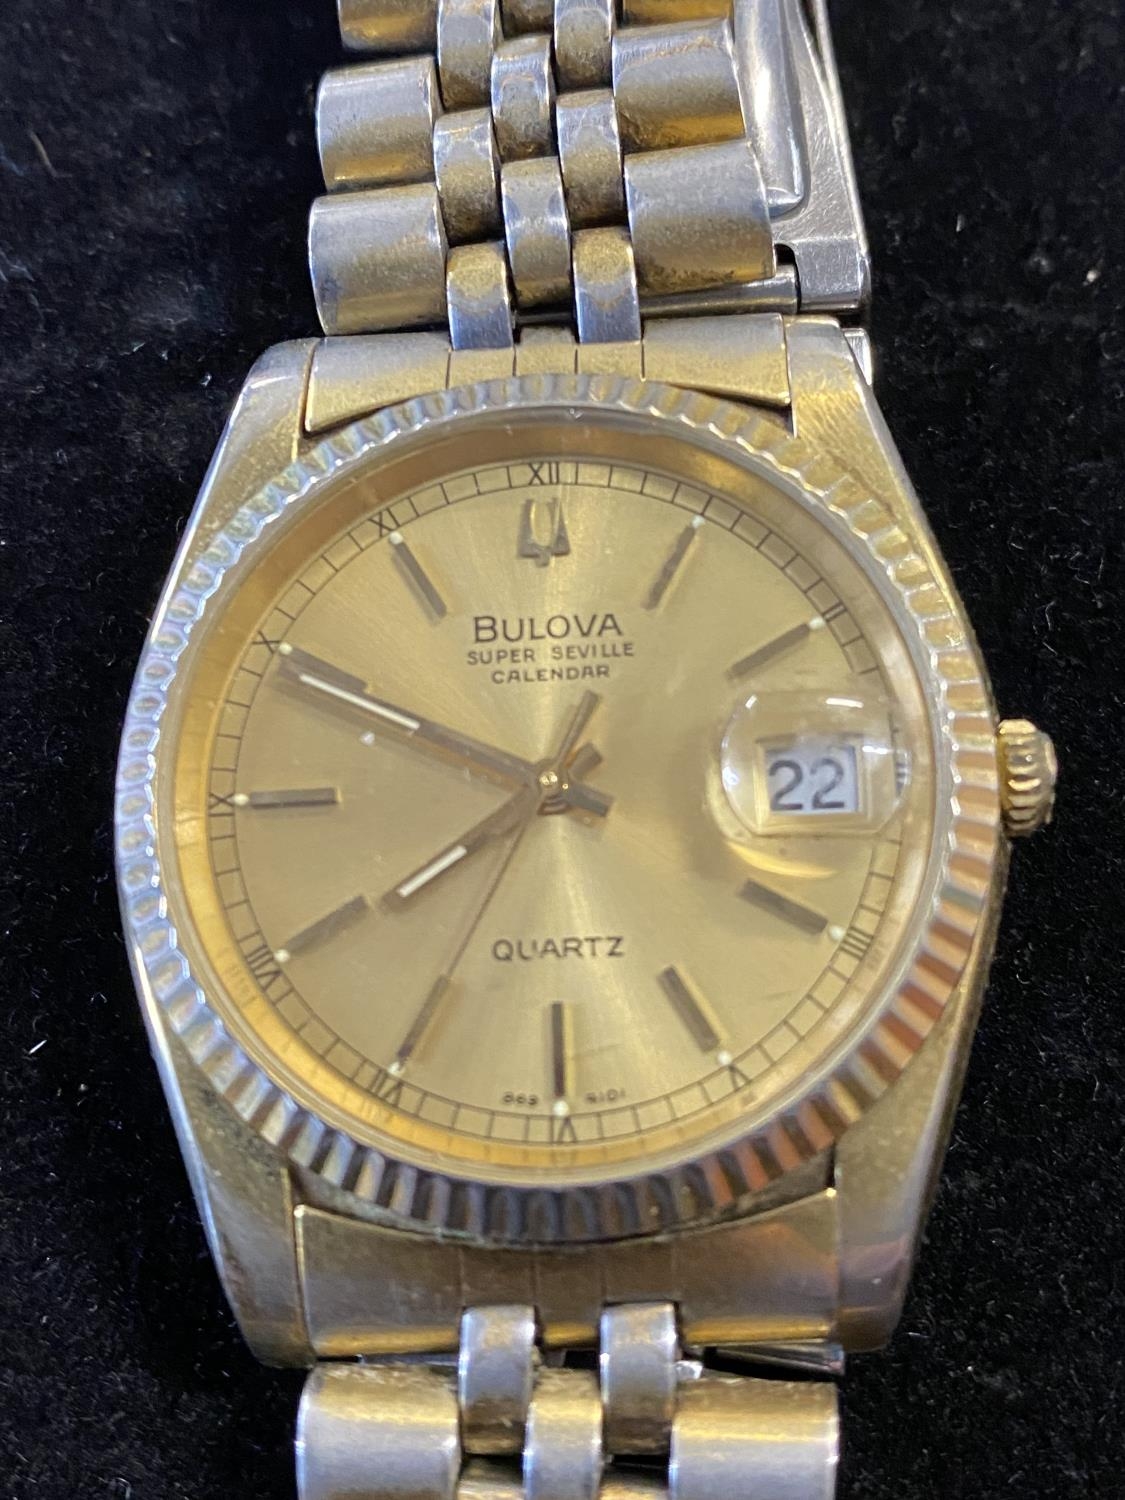 A men's Bulova Super Seville quartz watch with box and manual - Image 2 of 2